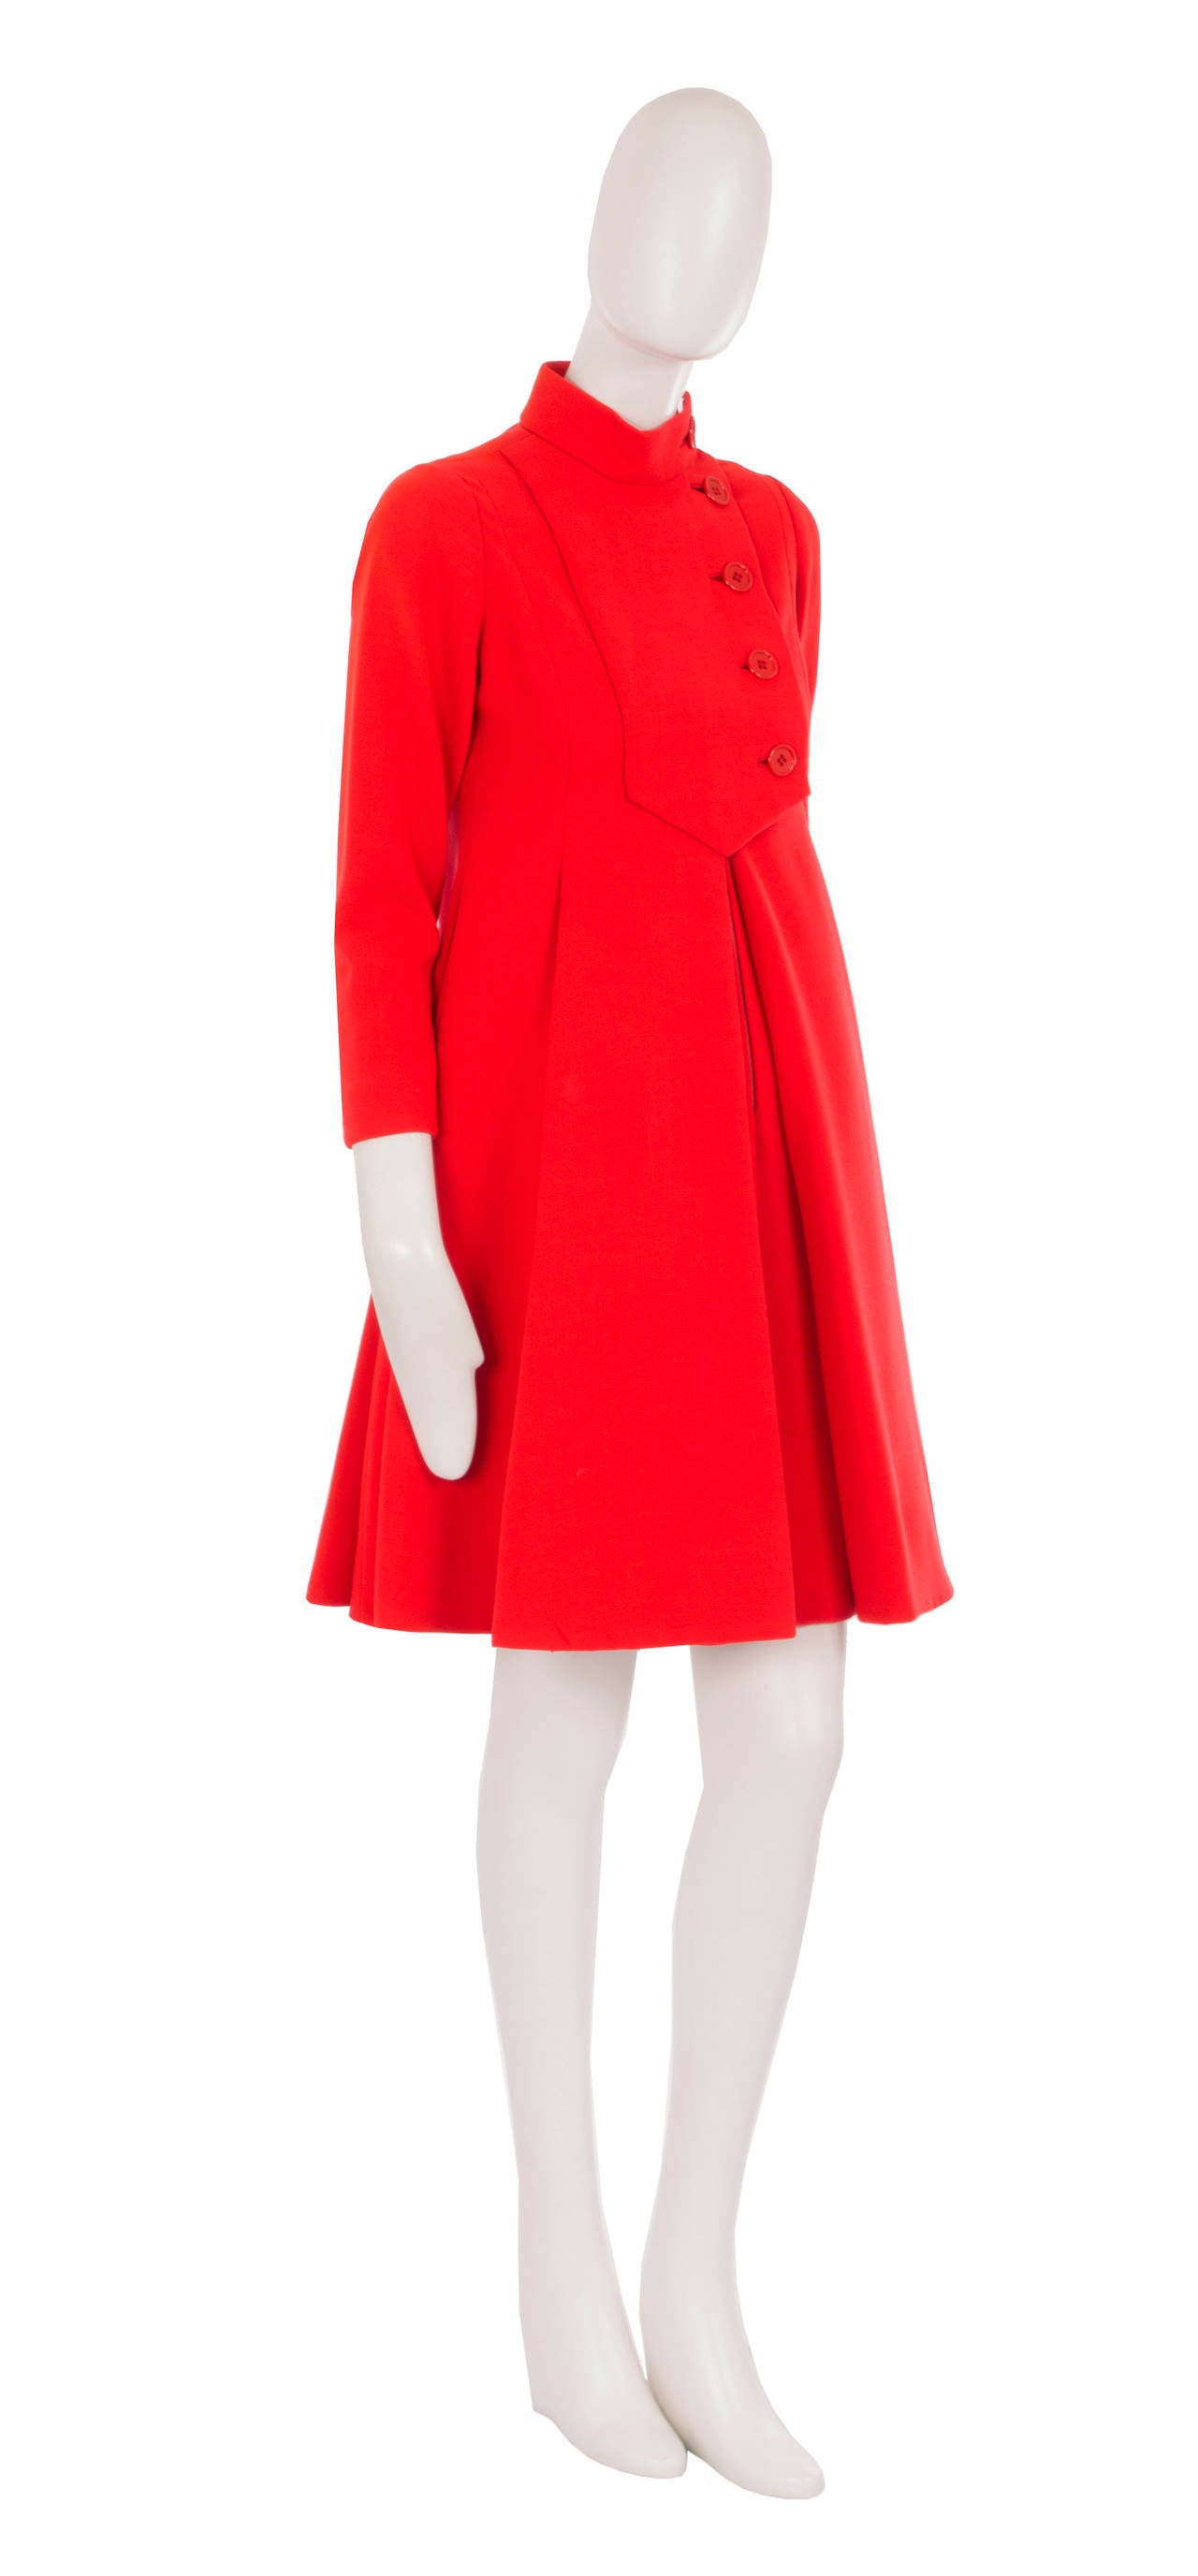 A fun daytime option, this Geoffrey Beene dress will add a pop of colour to any wardrobe. Constructed in vibrant red wool, the dress has a classic 60s A-line silhouette with box pleats in the skirt to increase volume. Fastening up the front with a